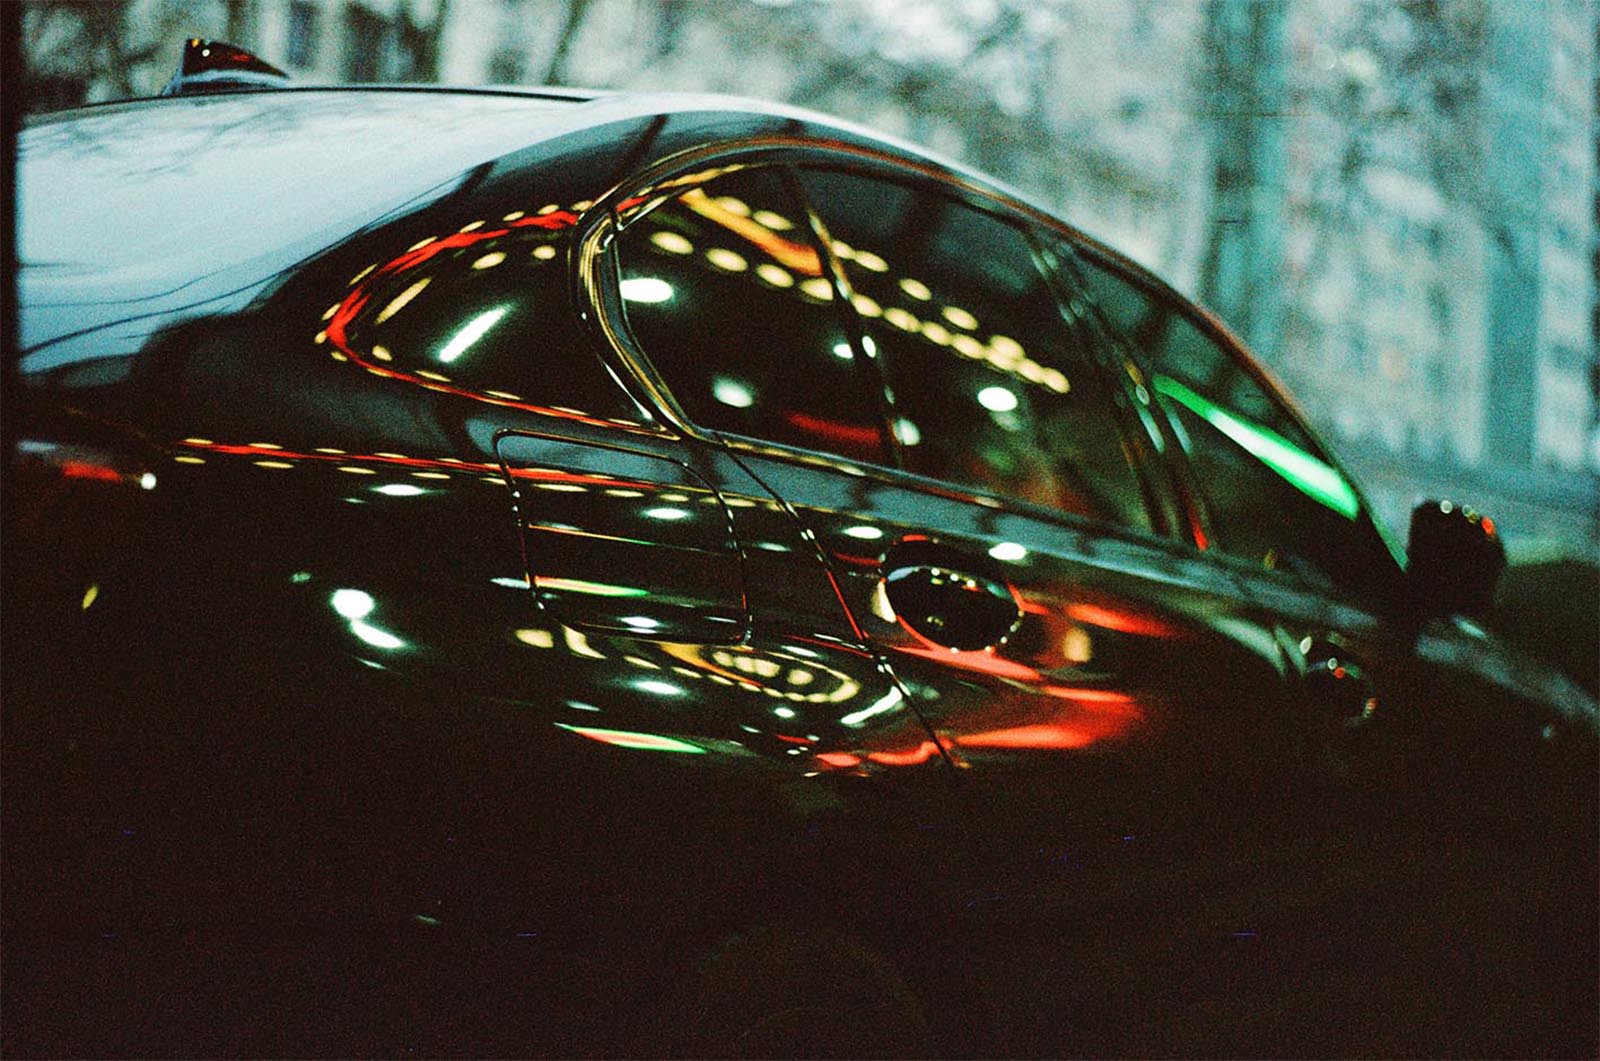 A dark car parked outdoors at dusk with colorful light reflections on its surface, highlighting the sleek curves and glossy finish of the vehicle.